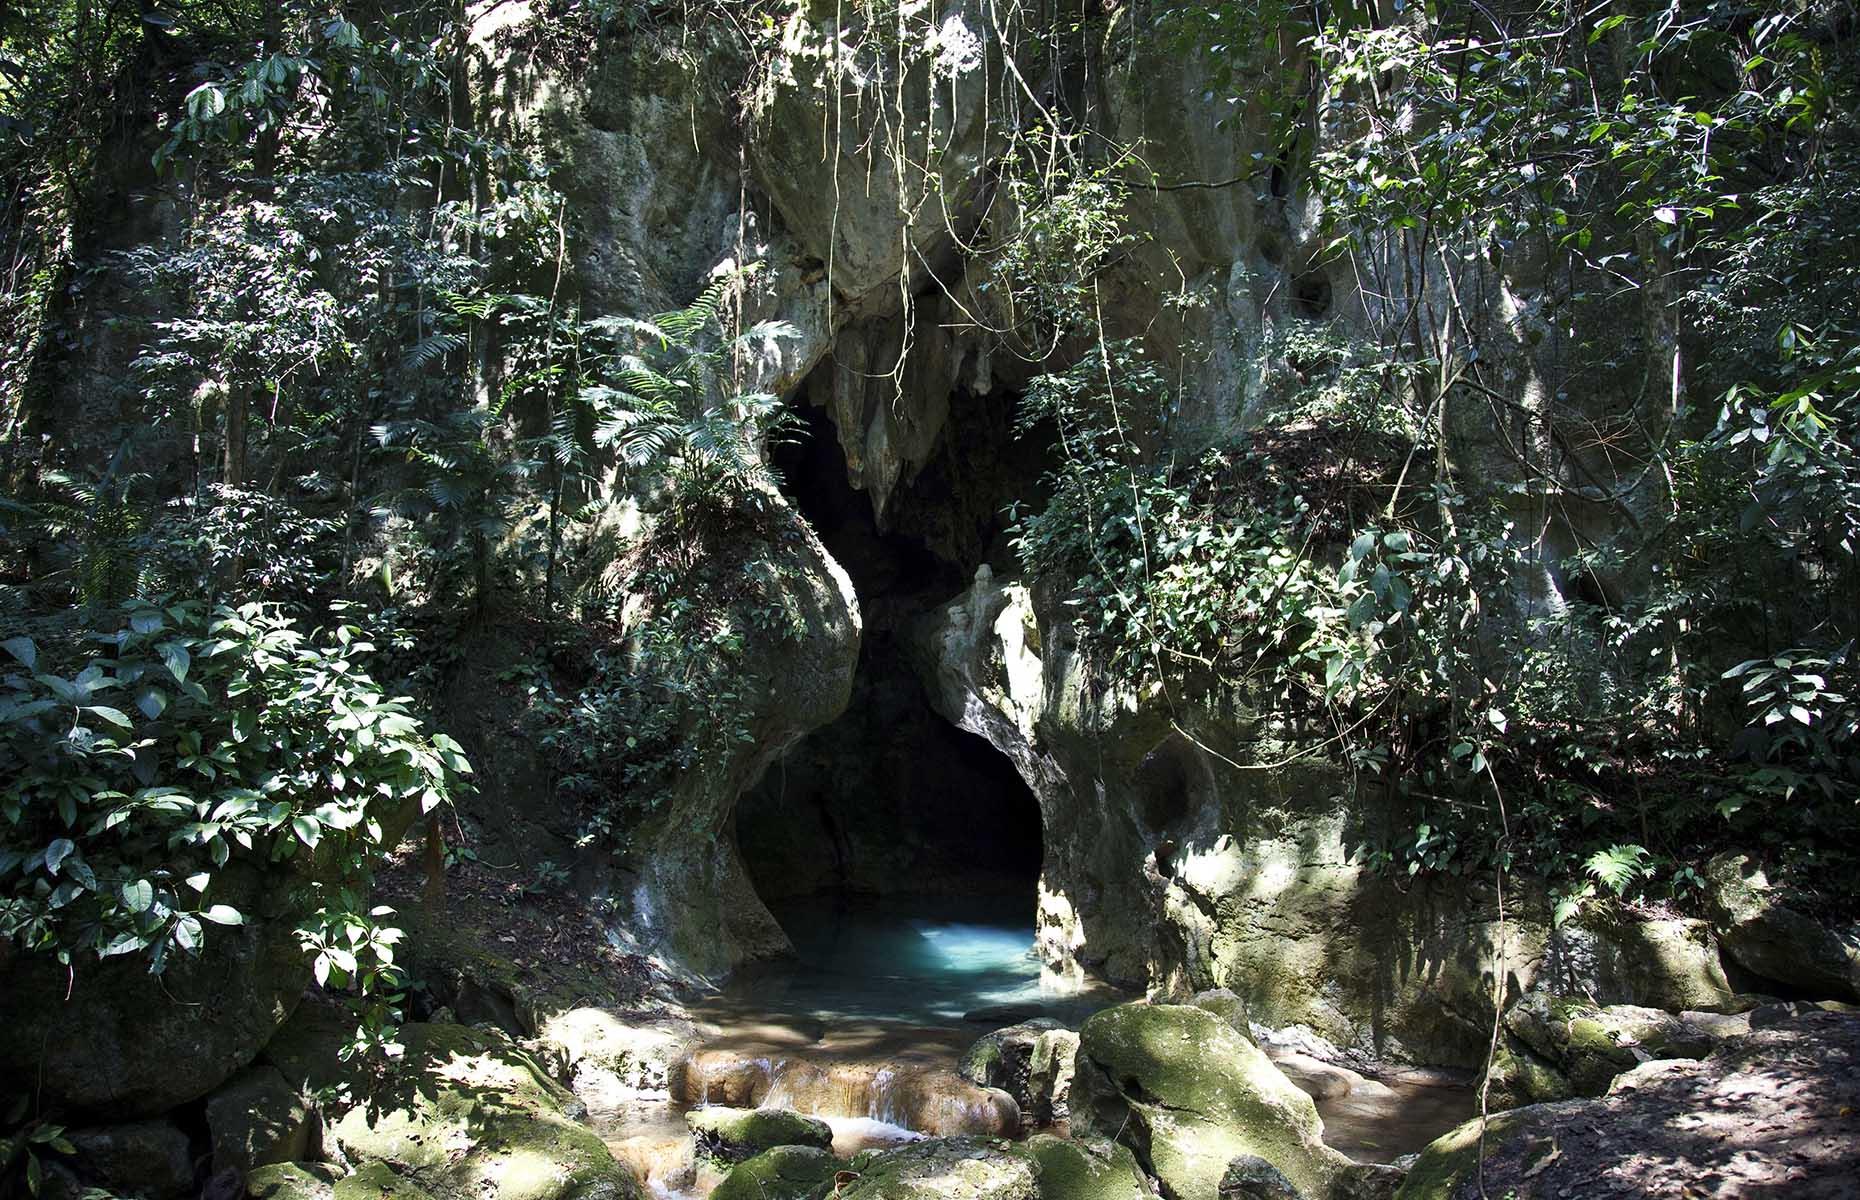 <p>Belize has literally thousands of caves, several of which are popular with tourists, but only one of them starred in an episode of <em>Ghost Hunters</em> and appeared at the top of <em>National Geographic</em>'s list of the world's top 10 most sacred caves. The Actun Tunichil Muknal Cave – known as the ATM Cave – near the mountain town of San Ignacio is a labyrinthine network of subterranean passages that visitors must hike, wade and swim to traverse. It's also a former center of Mayan spirituality that still boasts stoneware, skeletons and ceramics. Book tickets in advance – you can't enter the cave without a guide, and there's a cap of 125 visitors per day.</p>